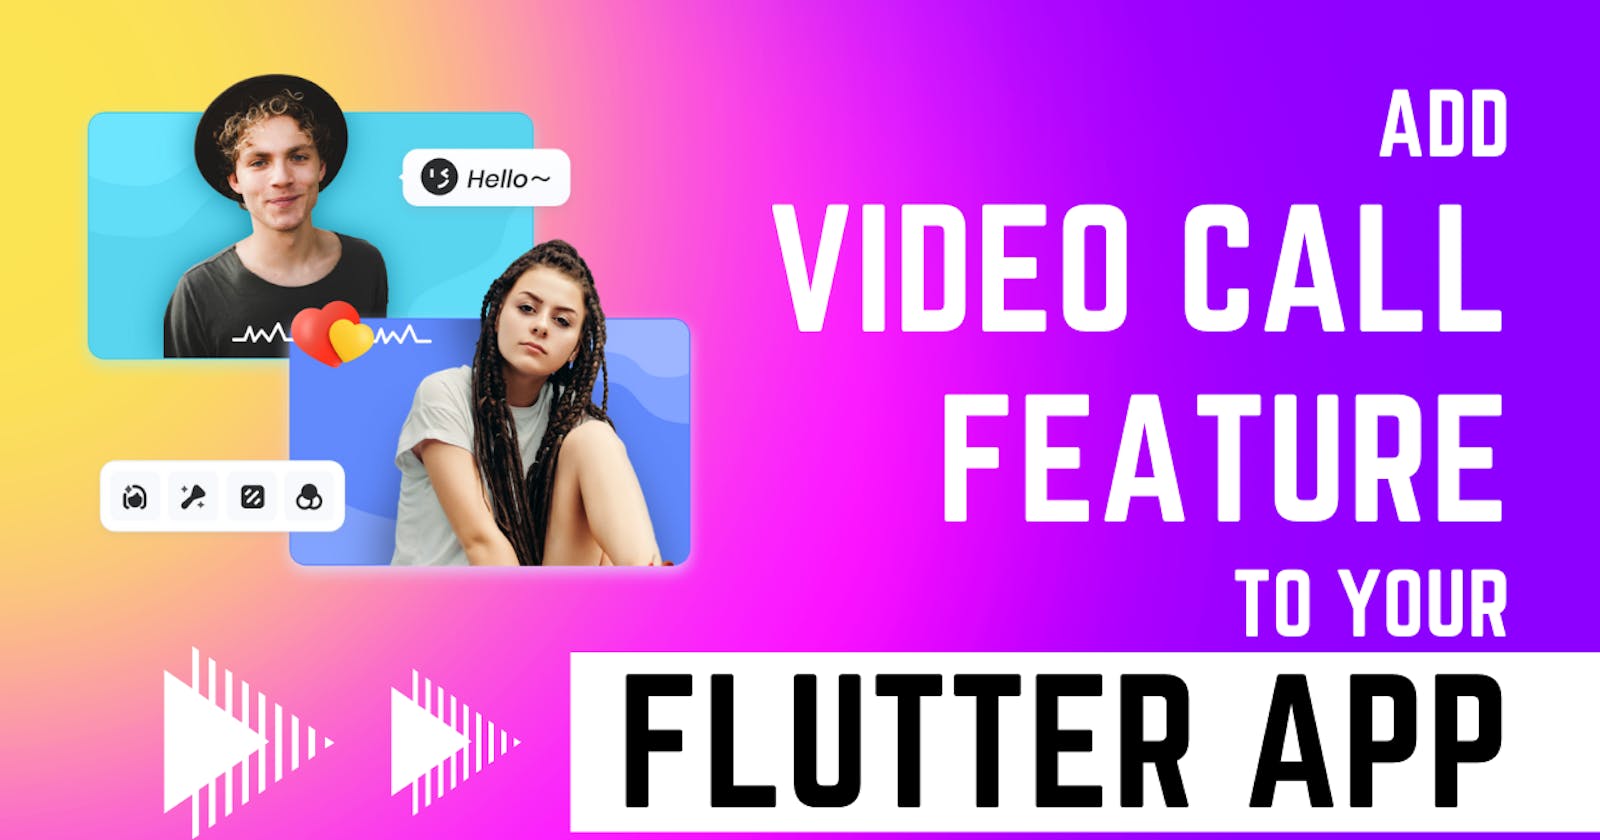 Add Video Call functionality to your Flutter app